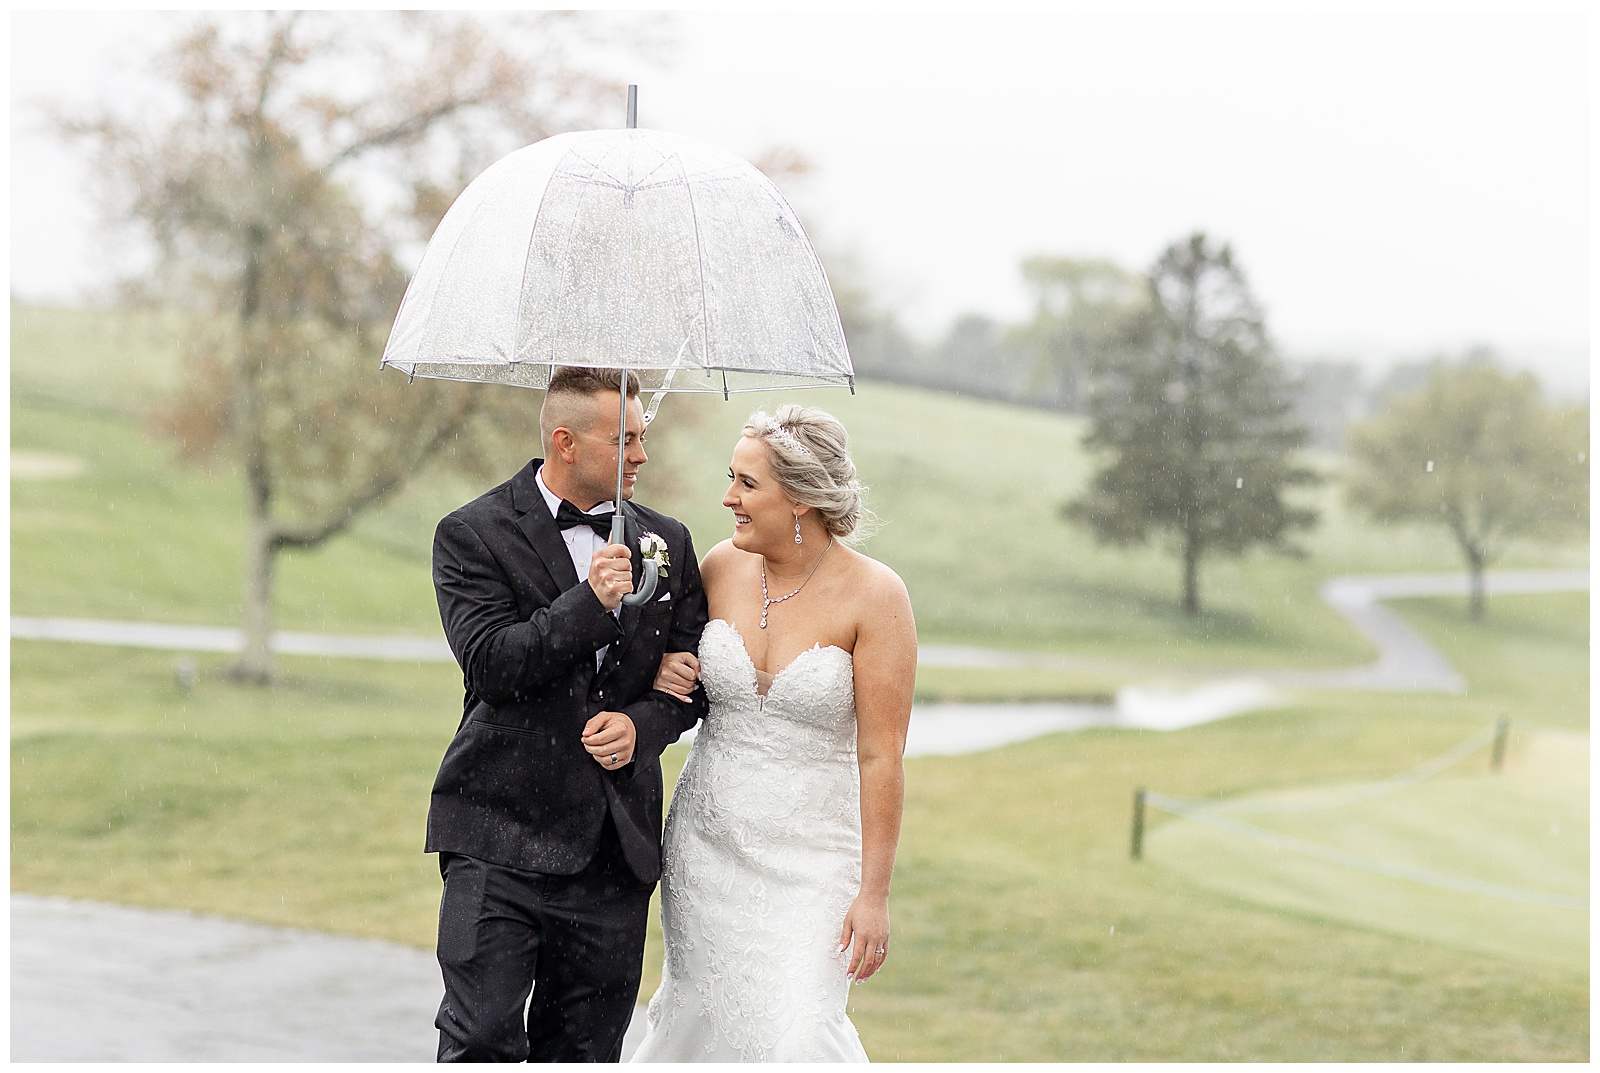 bride and groom huddle under cute clear umbrella on golf cart path on rainy wedding day in maryland